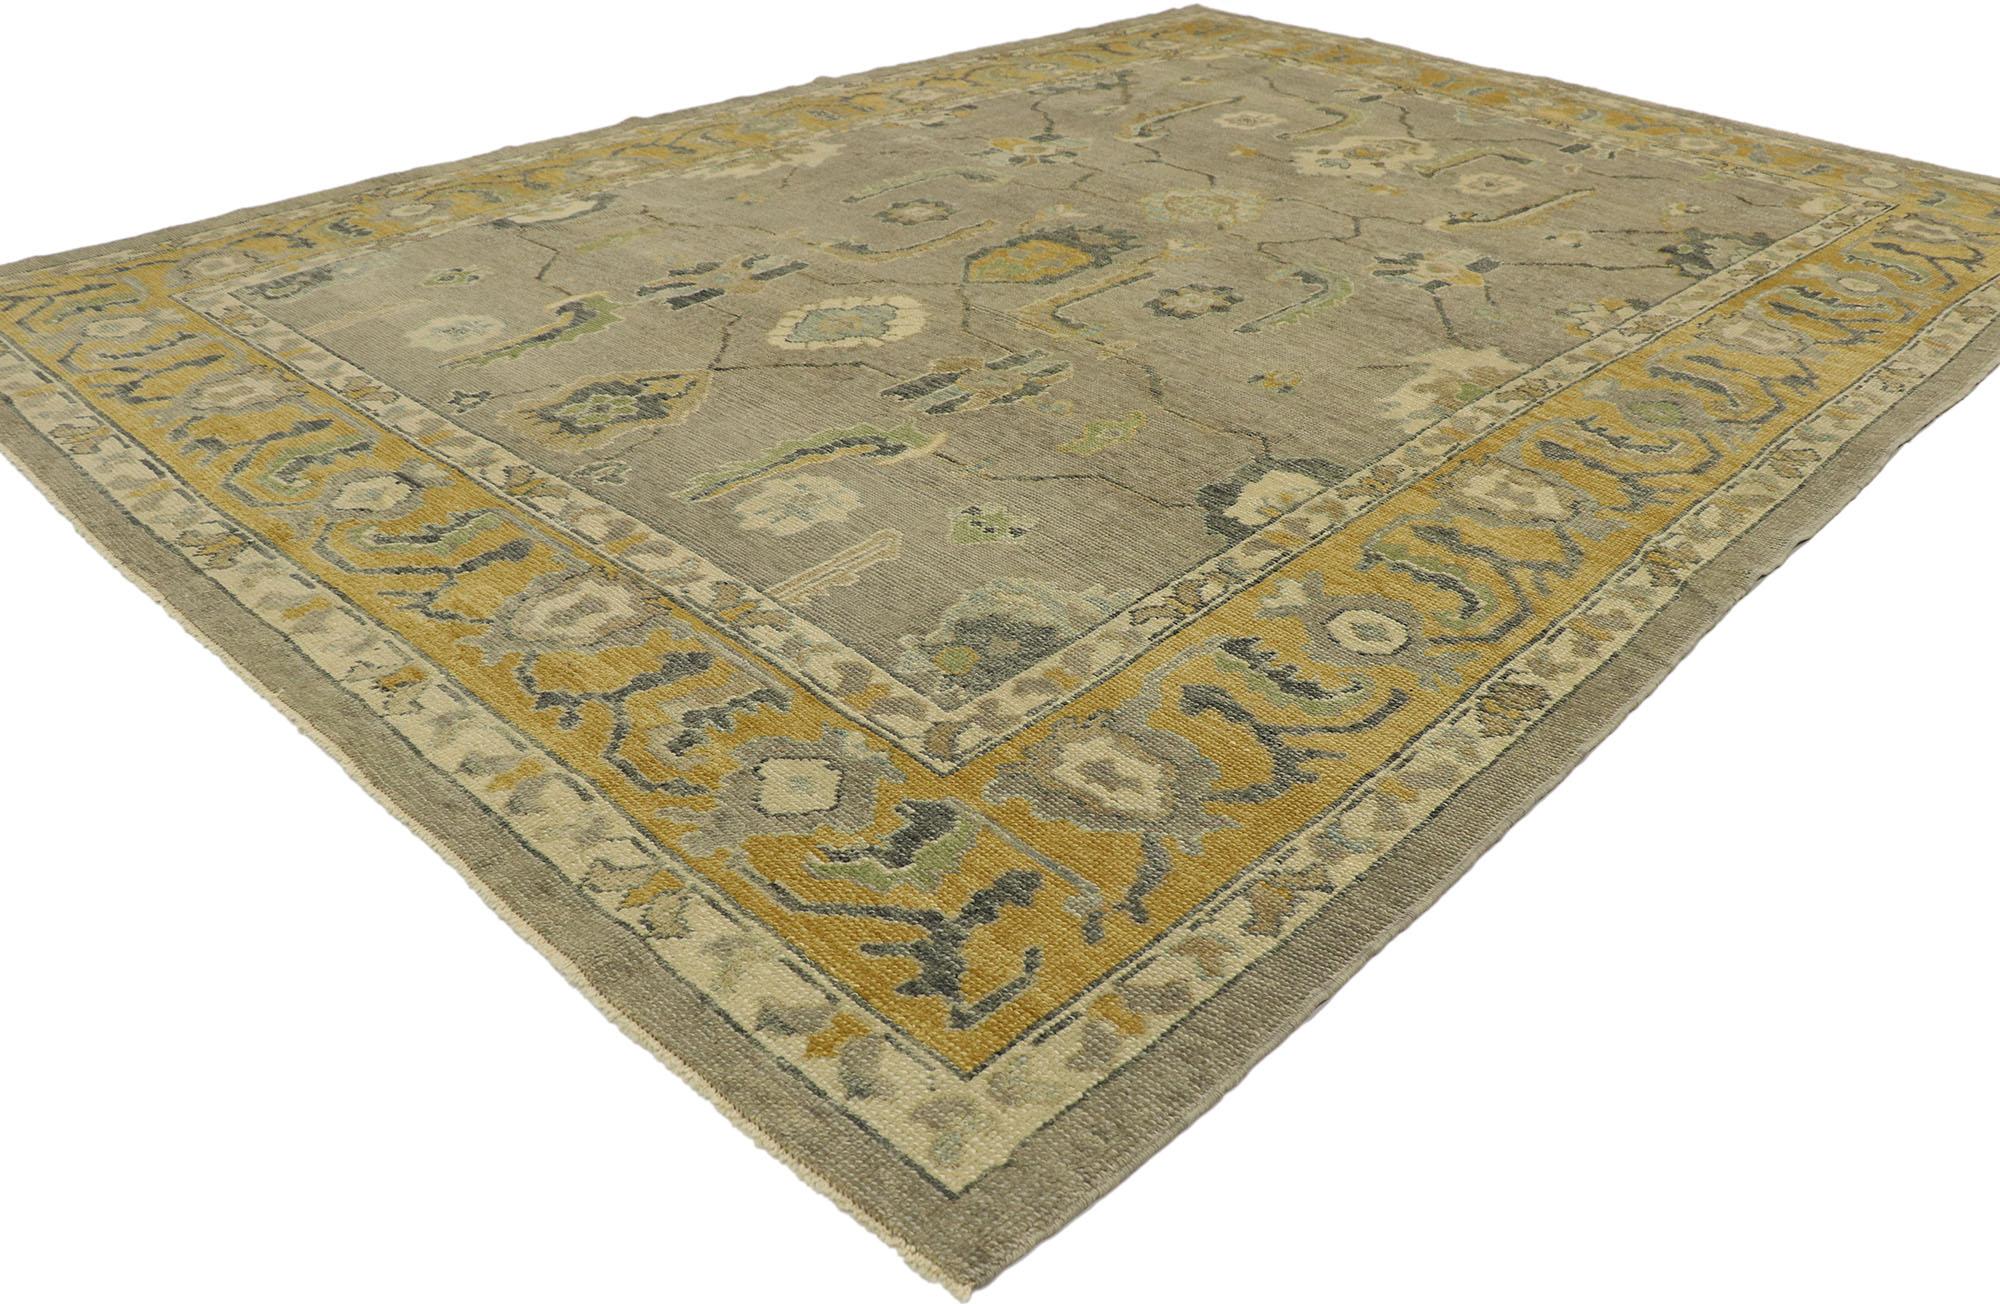 53206, new contemporary Turkish Oushak rug with Modern Transitional style. Blending elements from the modern world with earth-tone colors, this hand knotted wool contemporary Turkish Oushak rug will boost the coziness factor in nearly any space. The